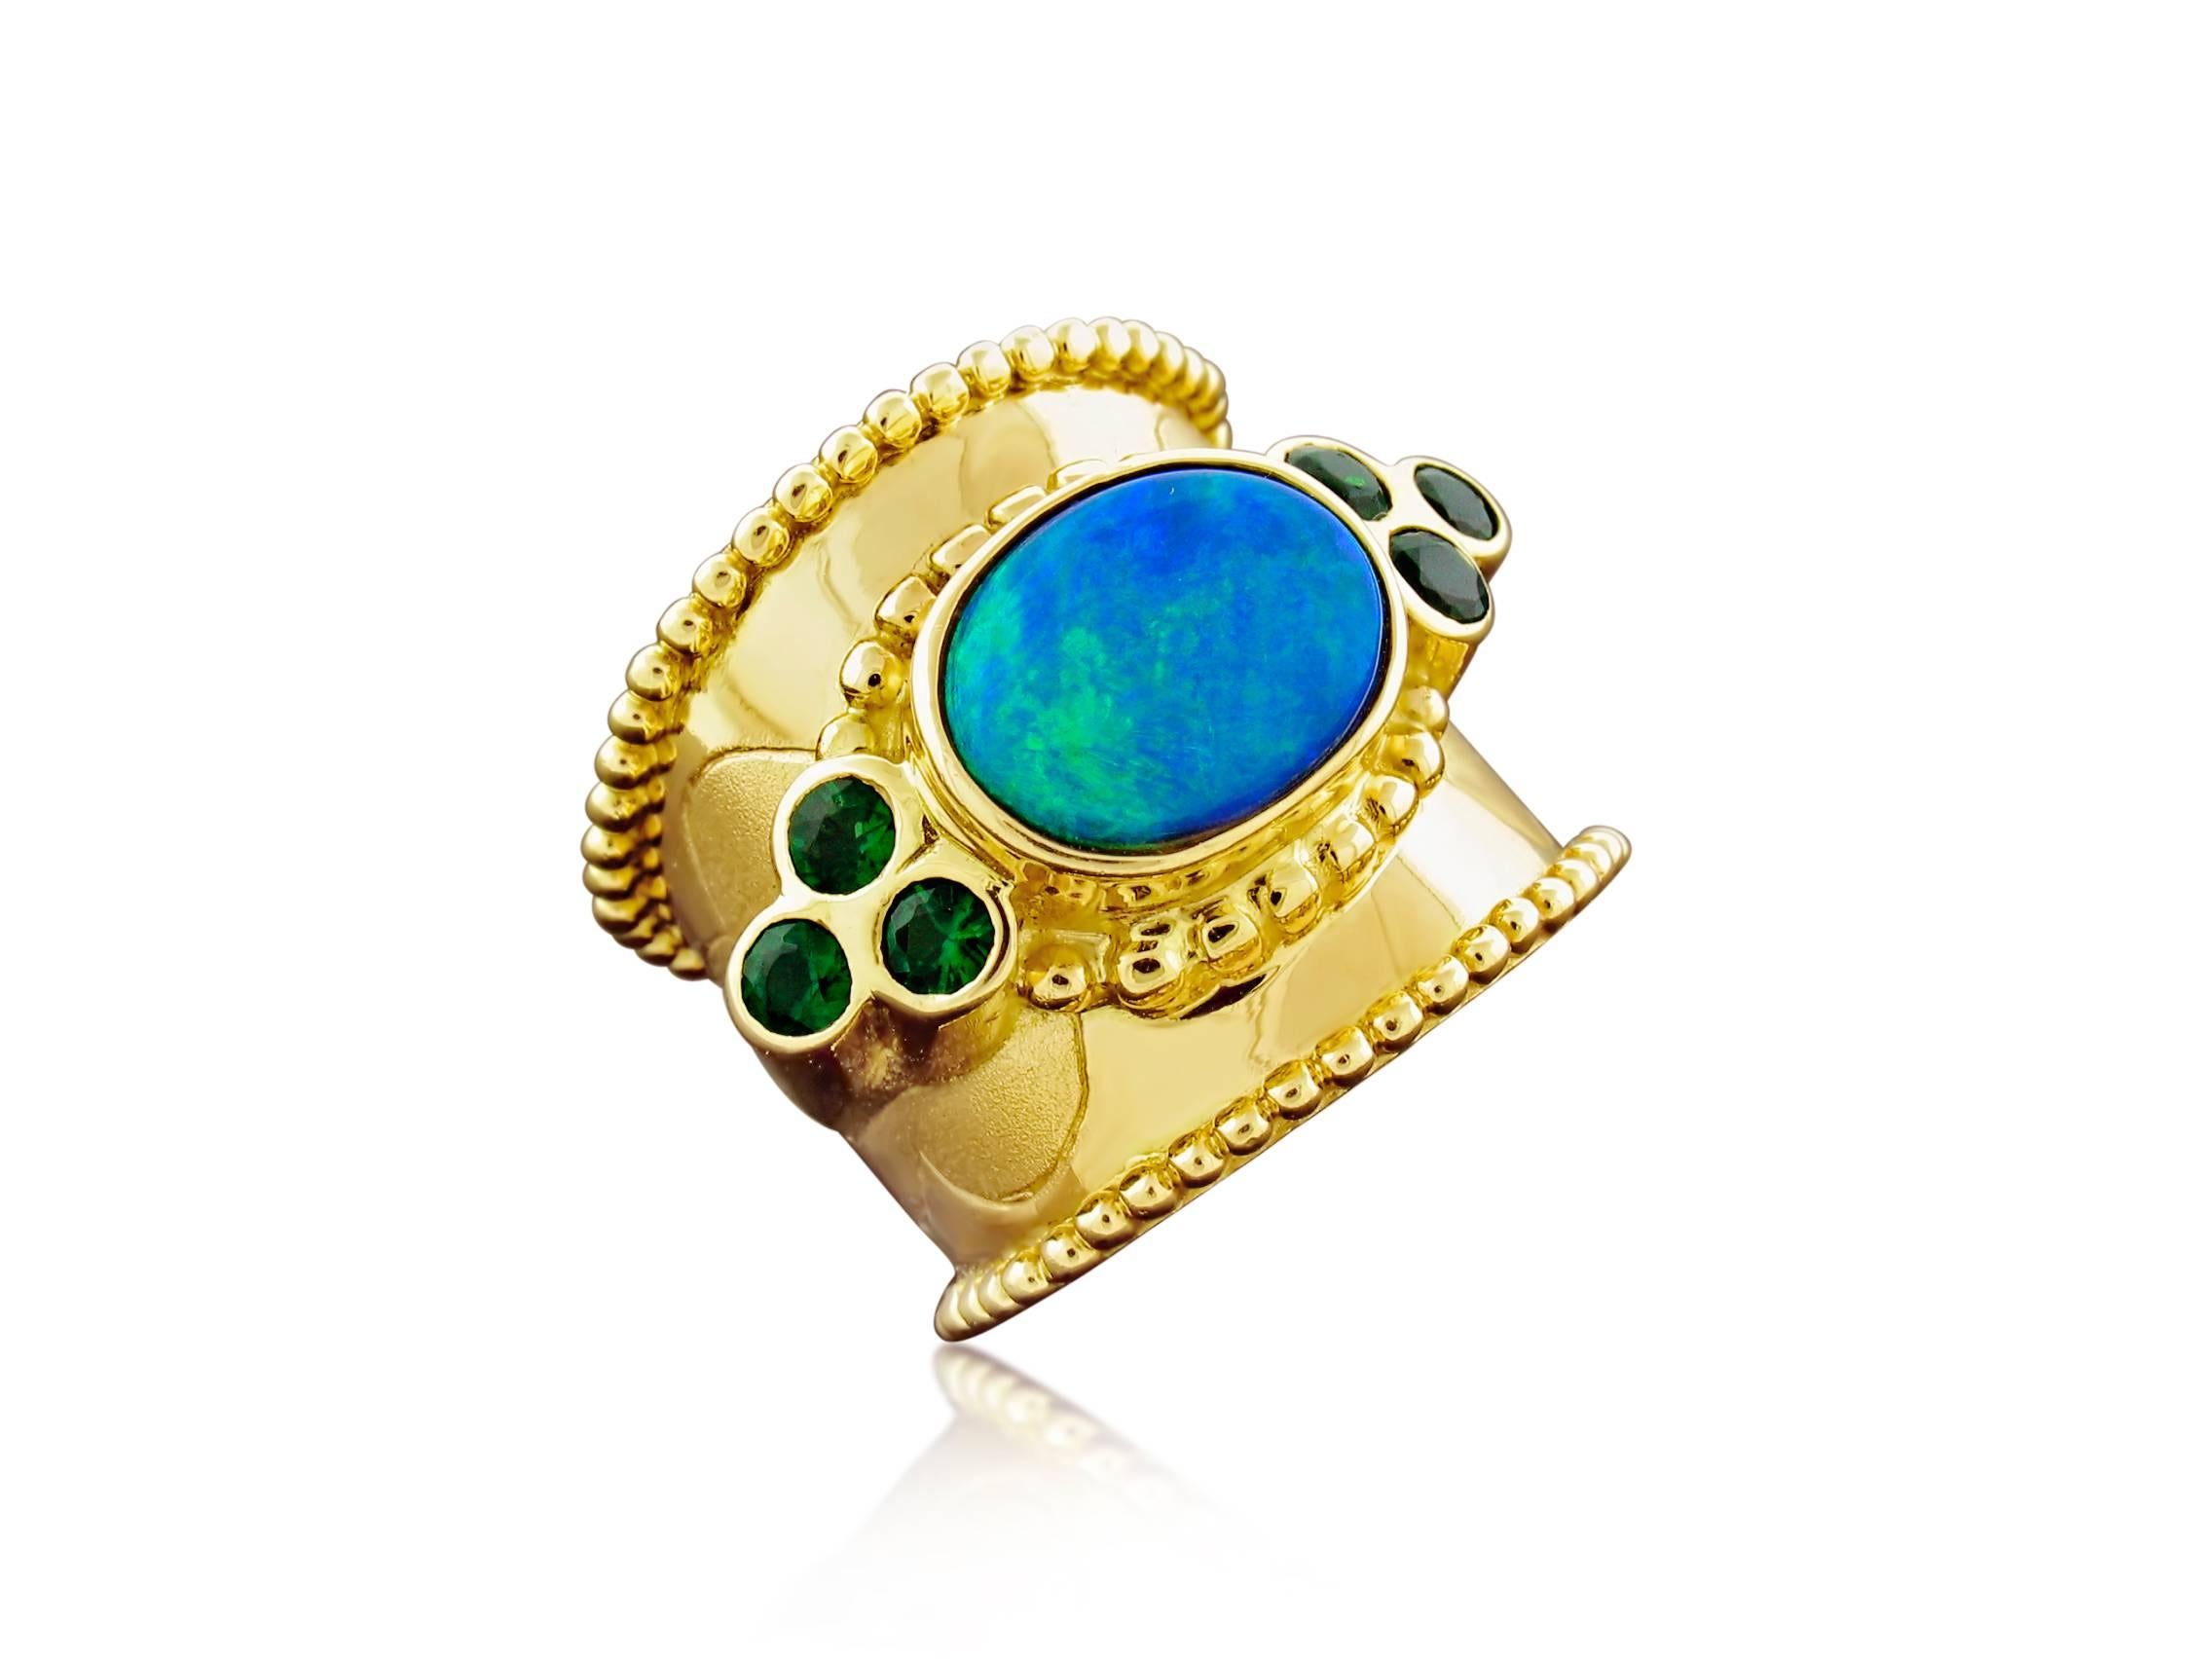 This ring was designed and made by well known designer Paula Crevoshay. It contains an exceptional Blue-Green Black Opal weighing 3.80 carats.  It is accented by  6 Chrome Tourmalines weighing 0.73 carats Size 7 1/2 ~ 8.  Wide band rings tend to fit